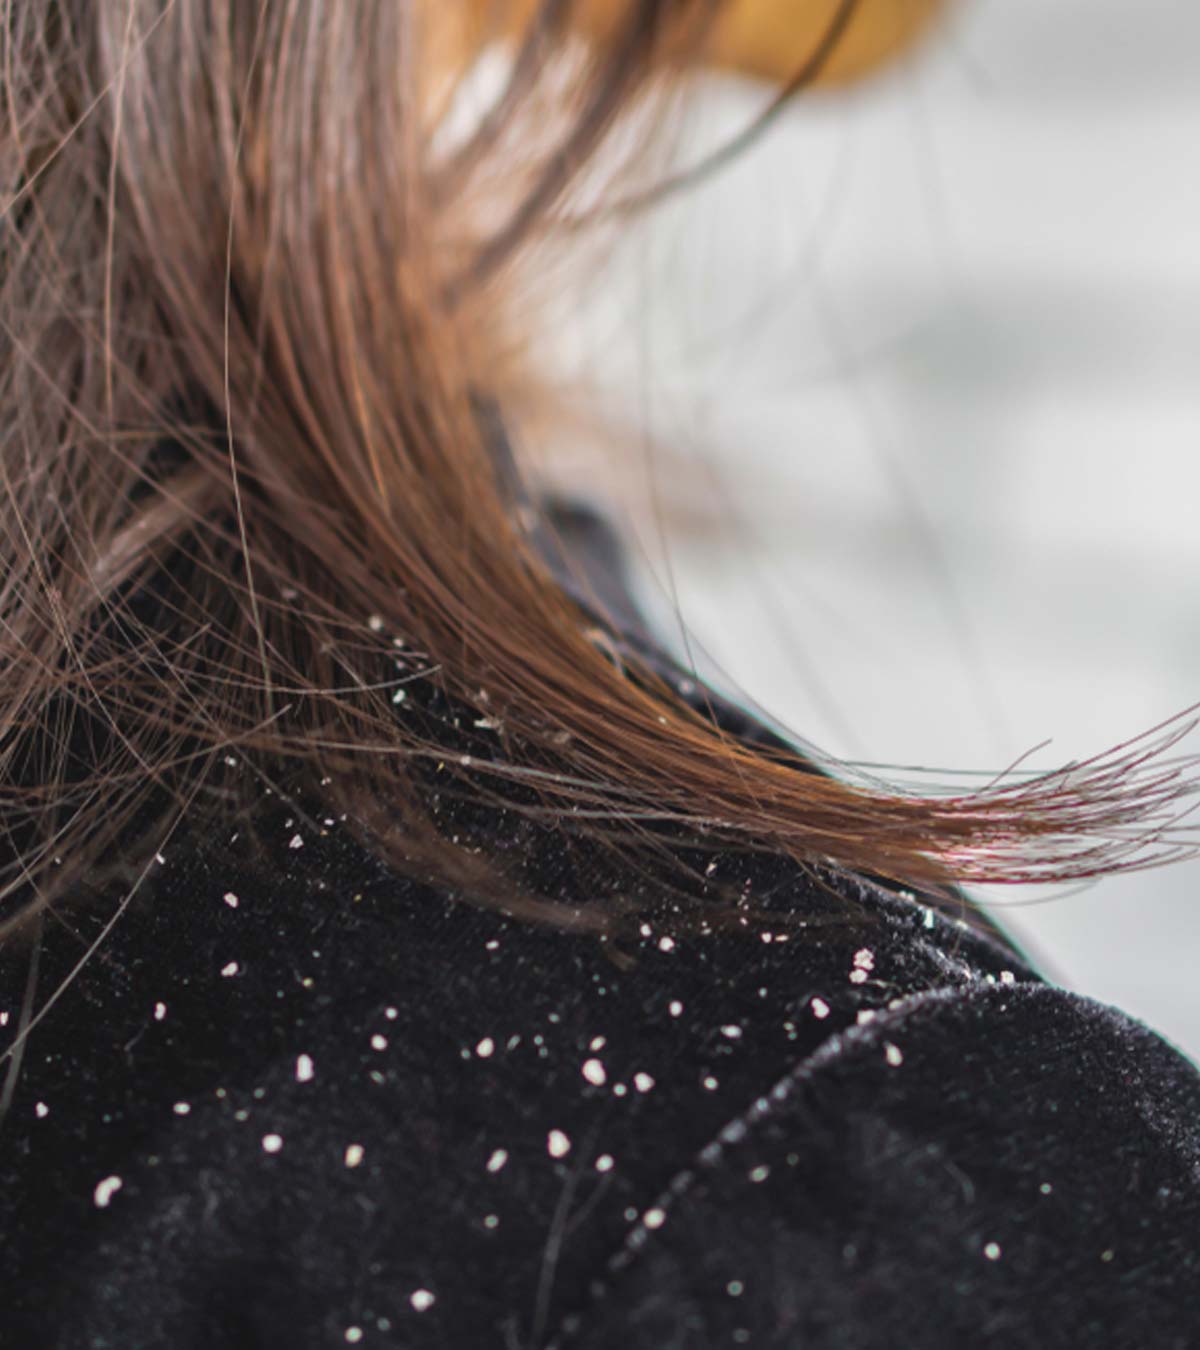 Dandruff During Pregnancy - Causes And Remedies